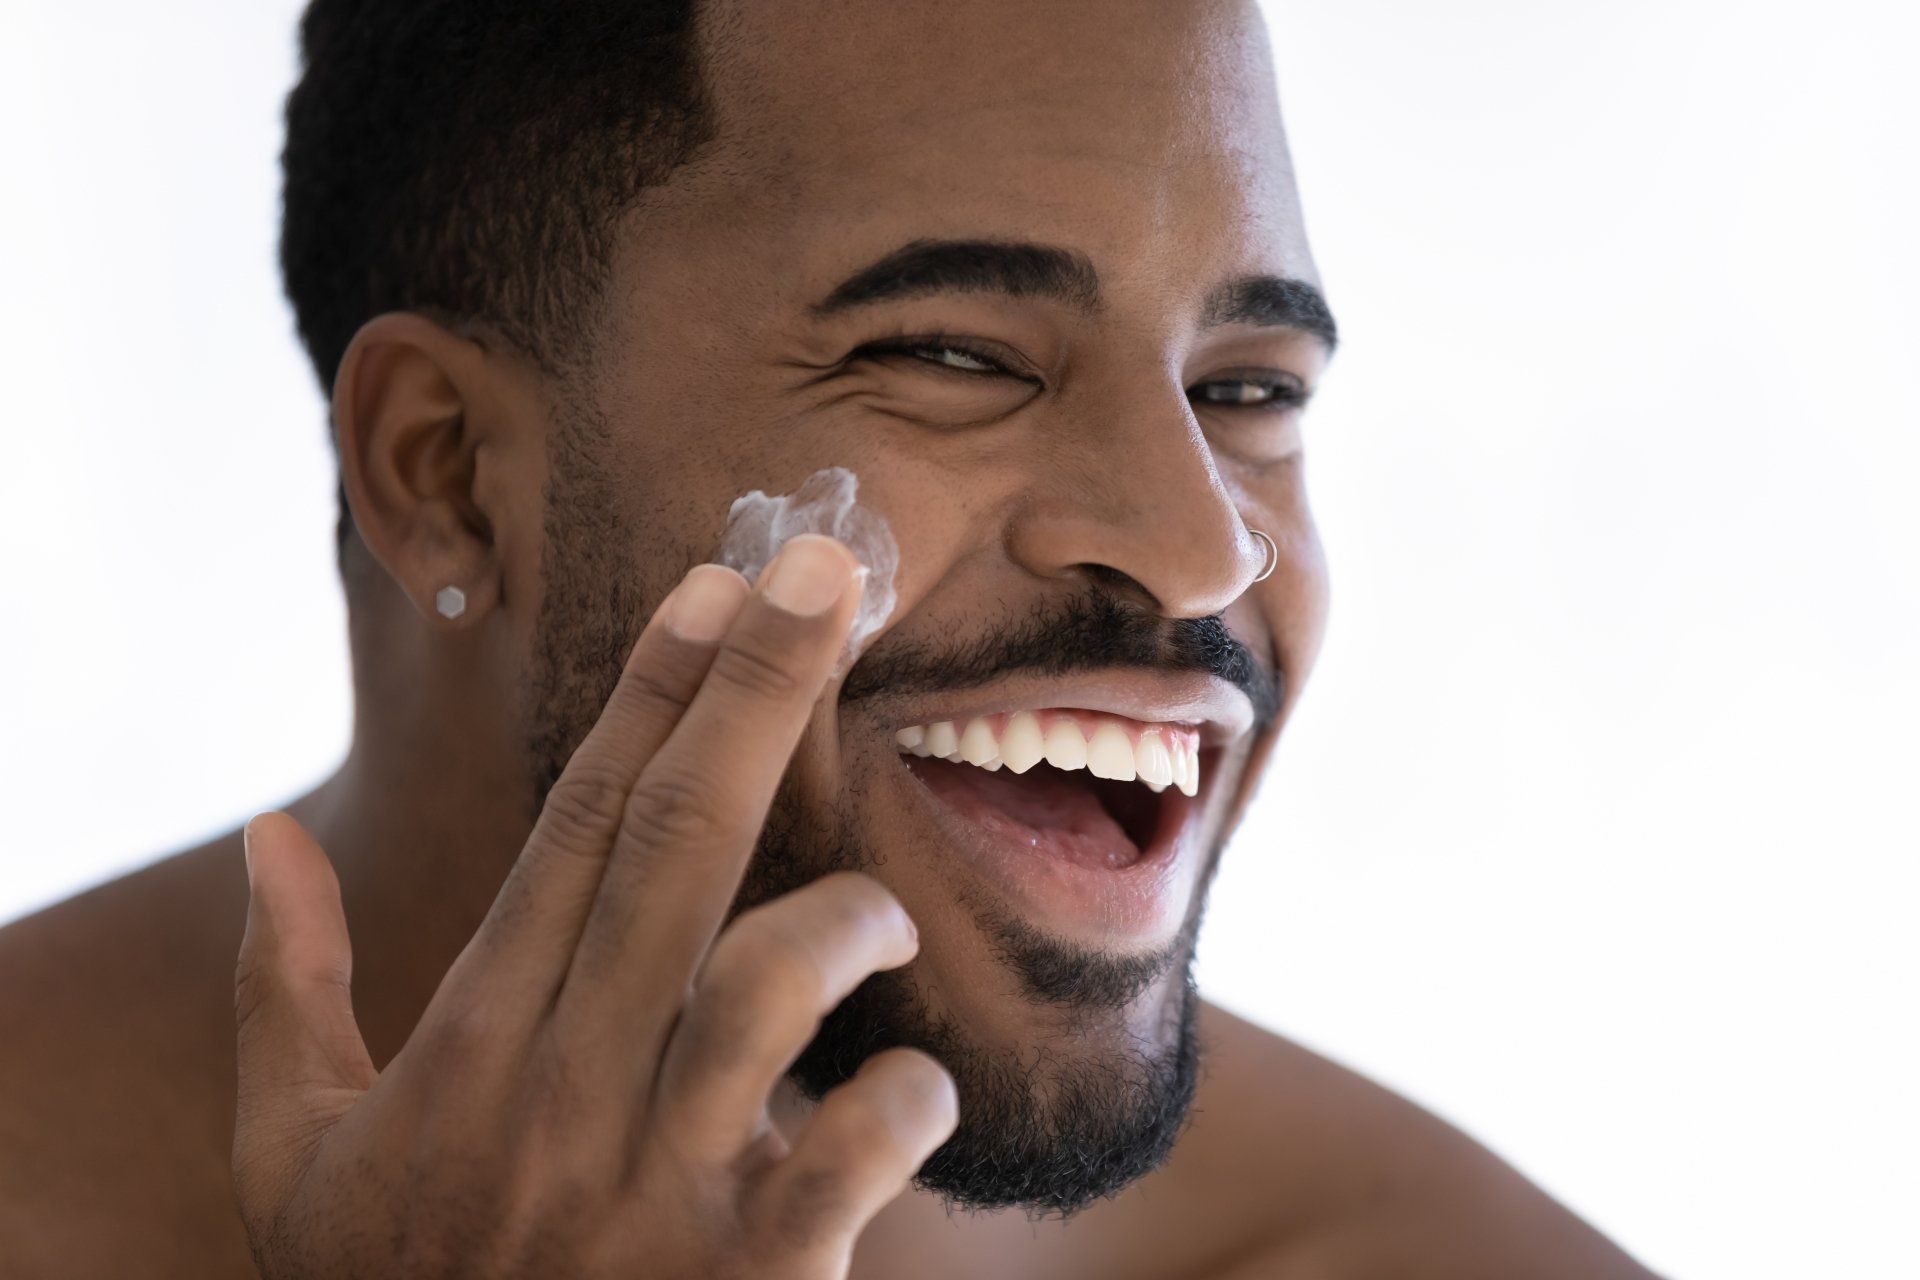 Image of Acne Topical Cream Application for Male of African Descent